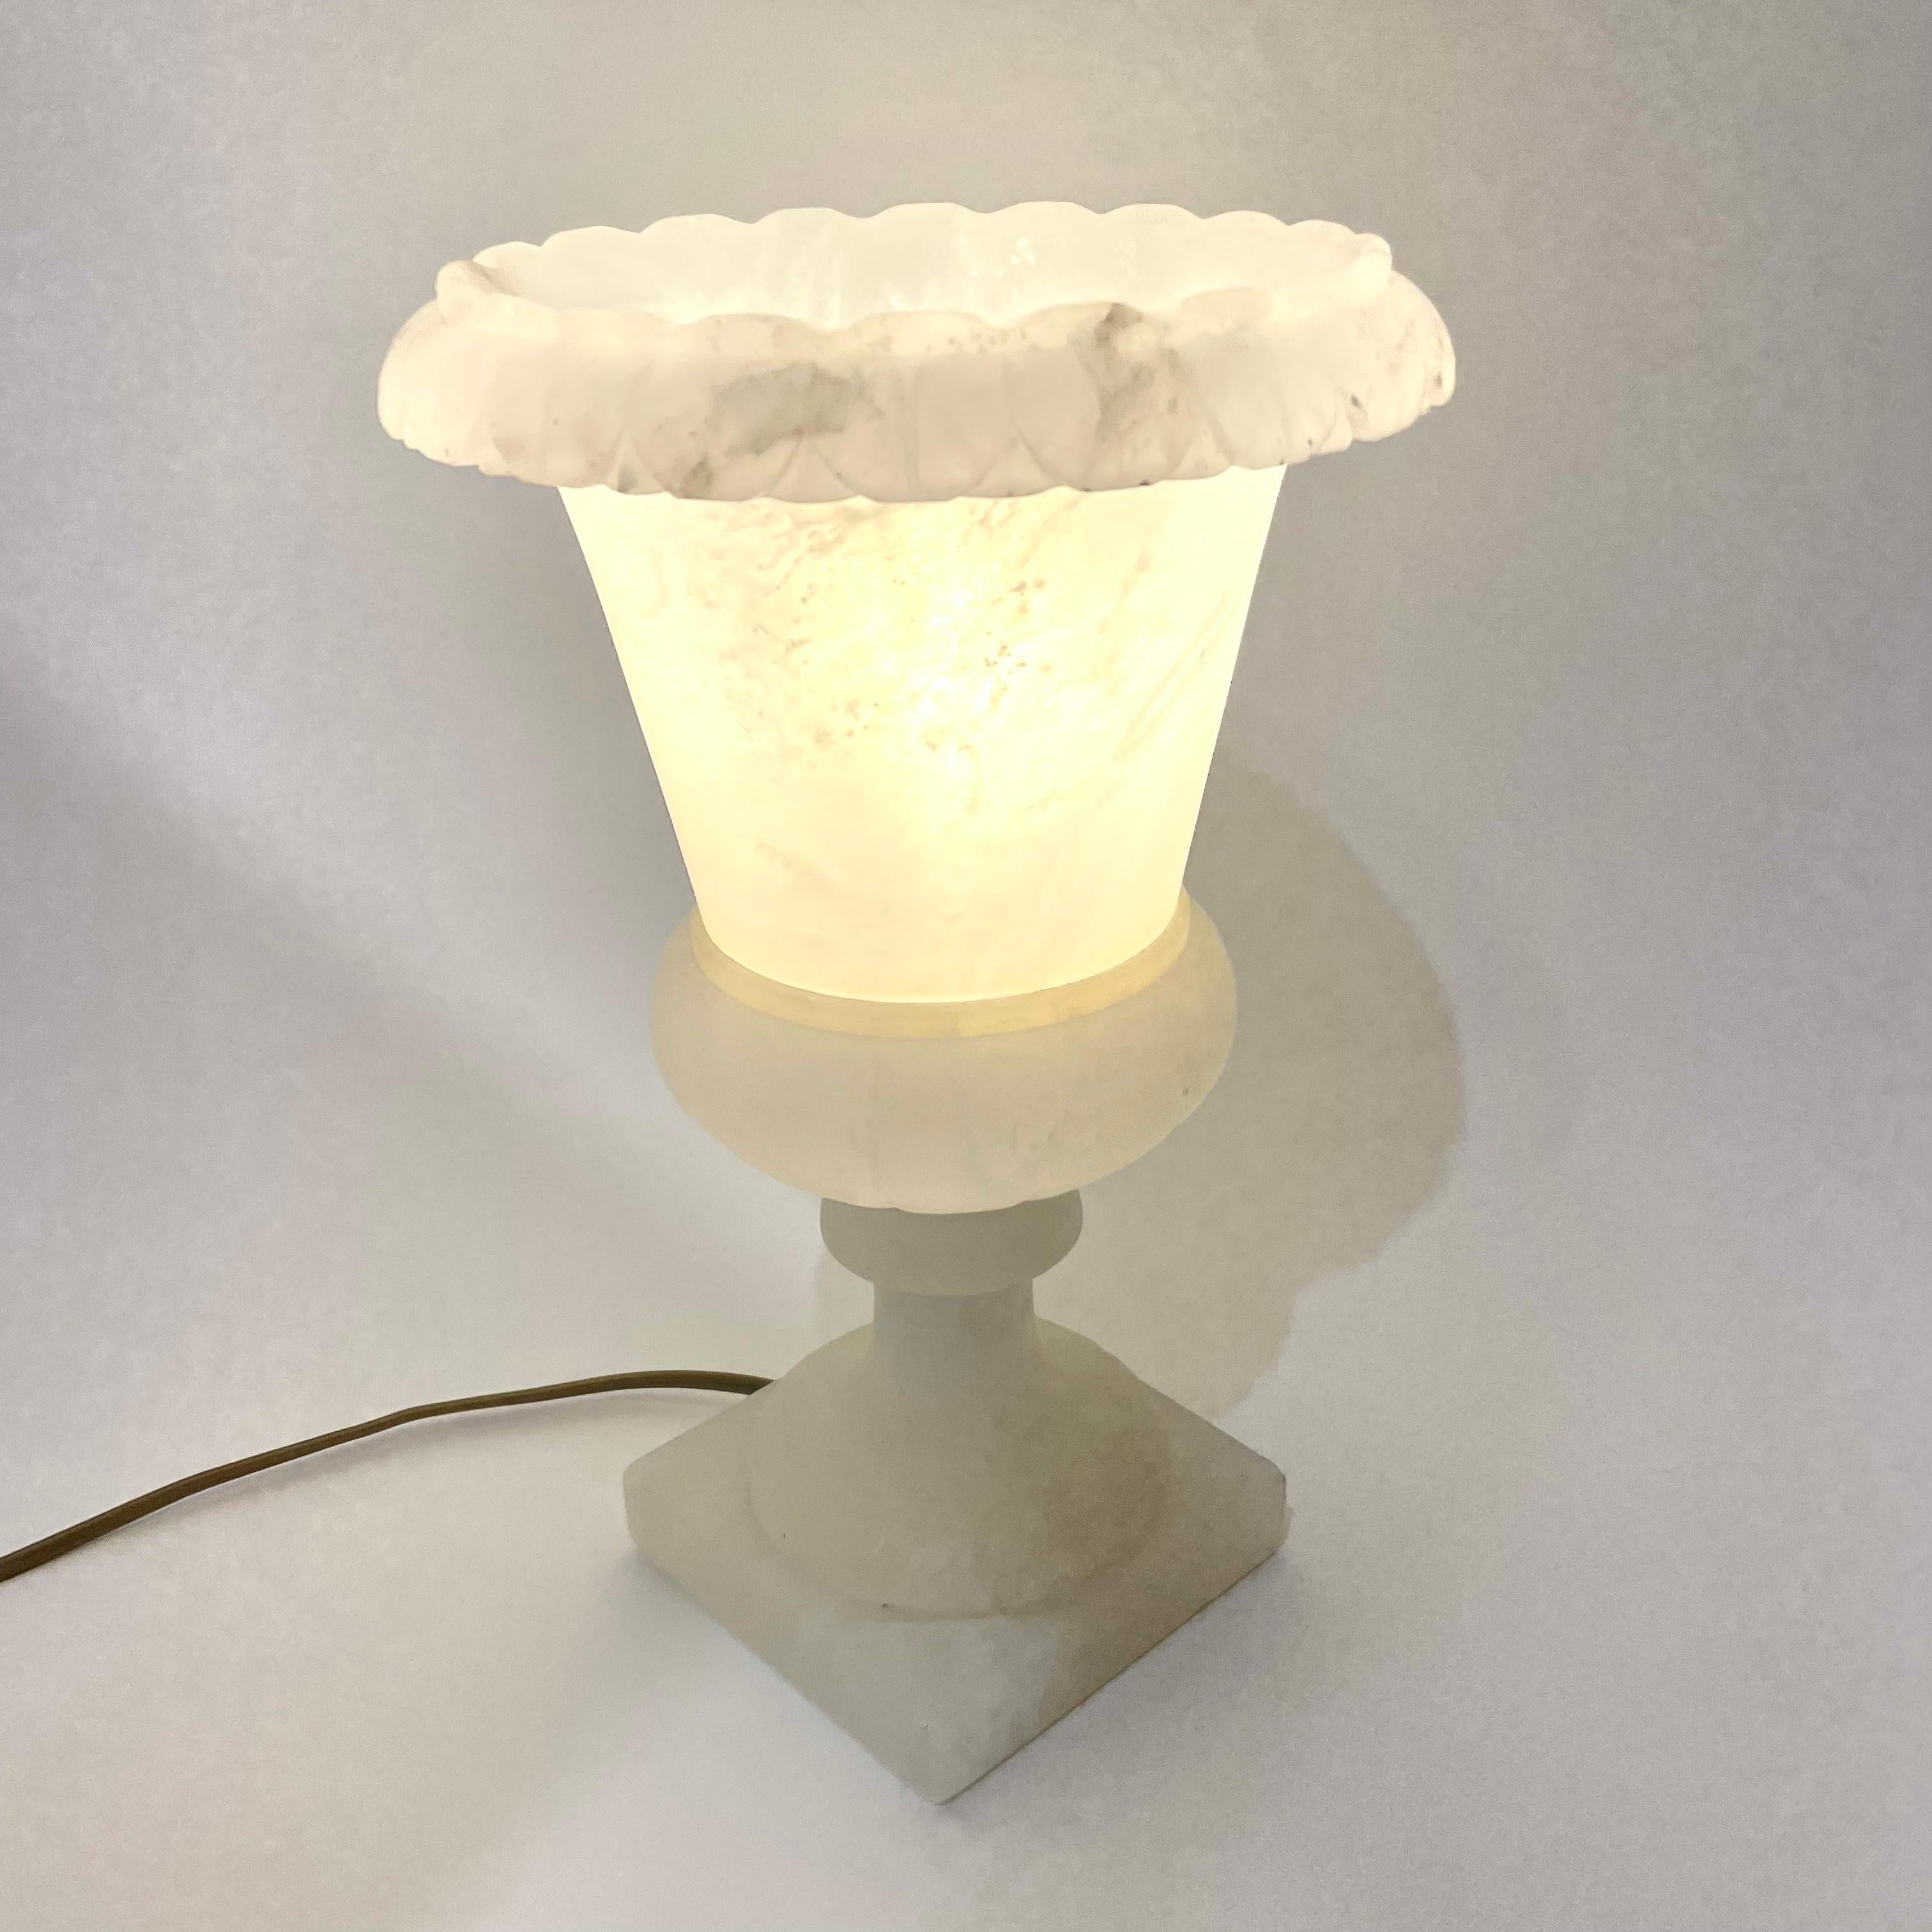 European Elegant Alabaster Table Lamp in the Shape of a Classical Urn, Early 20th Century For Sale